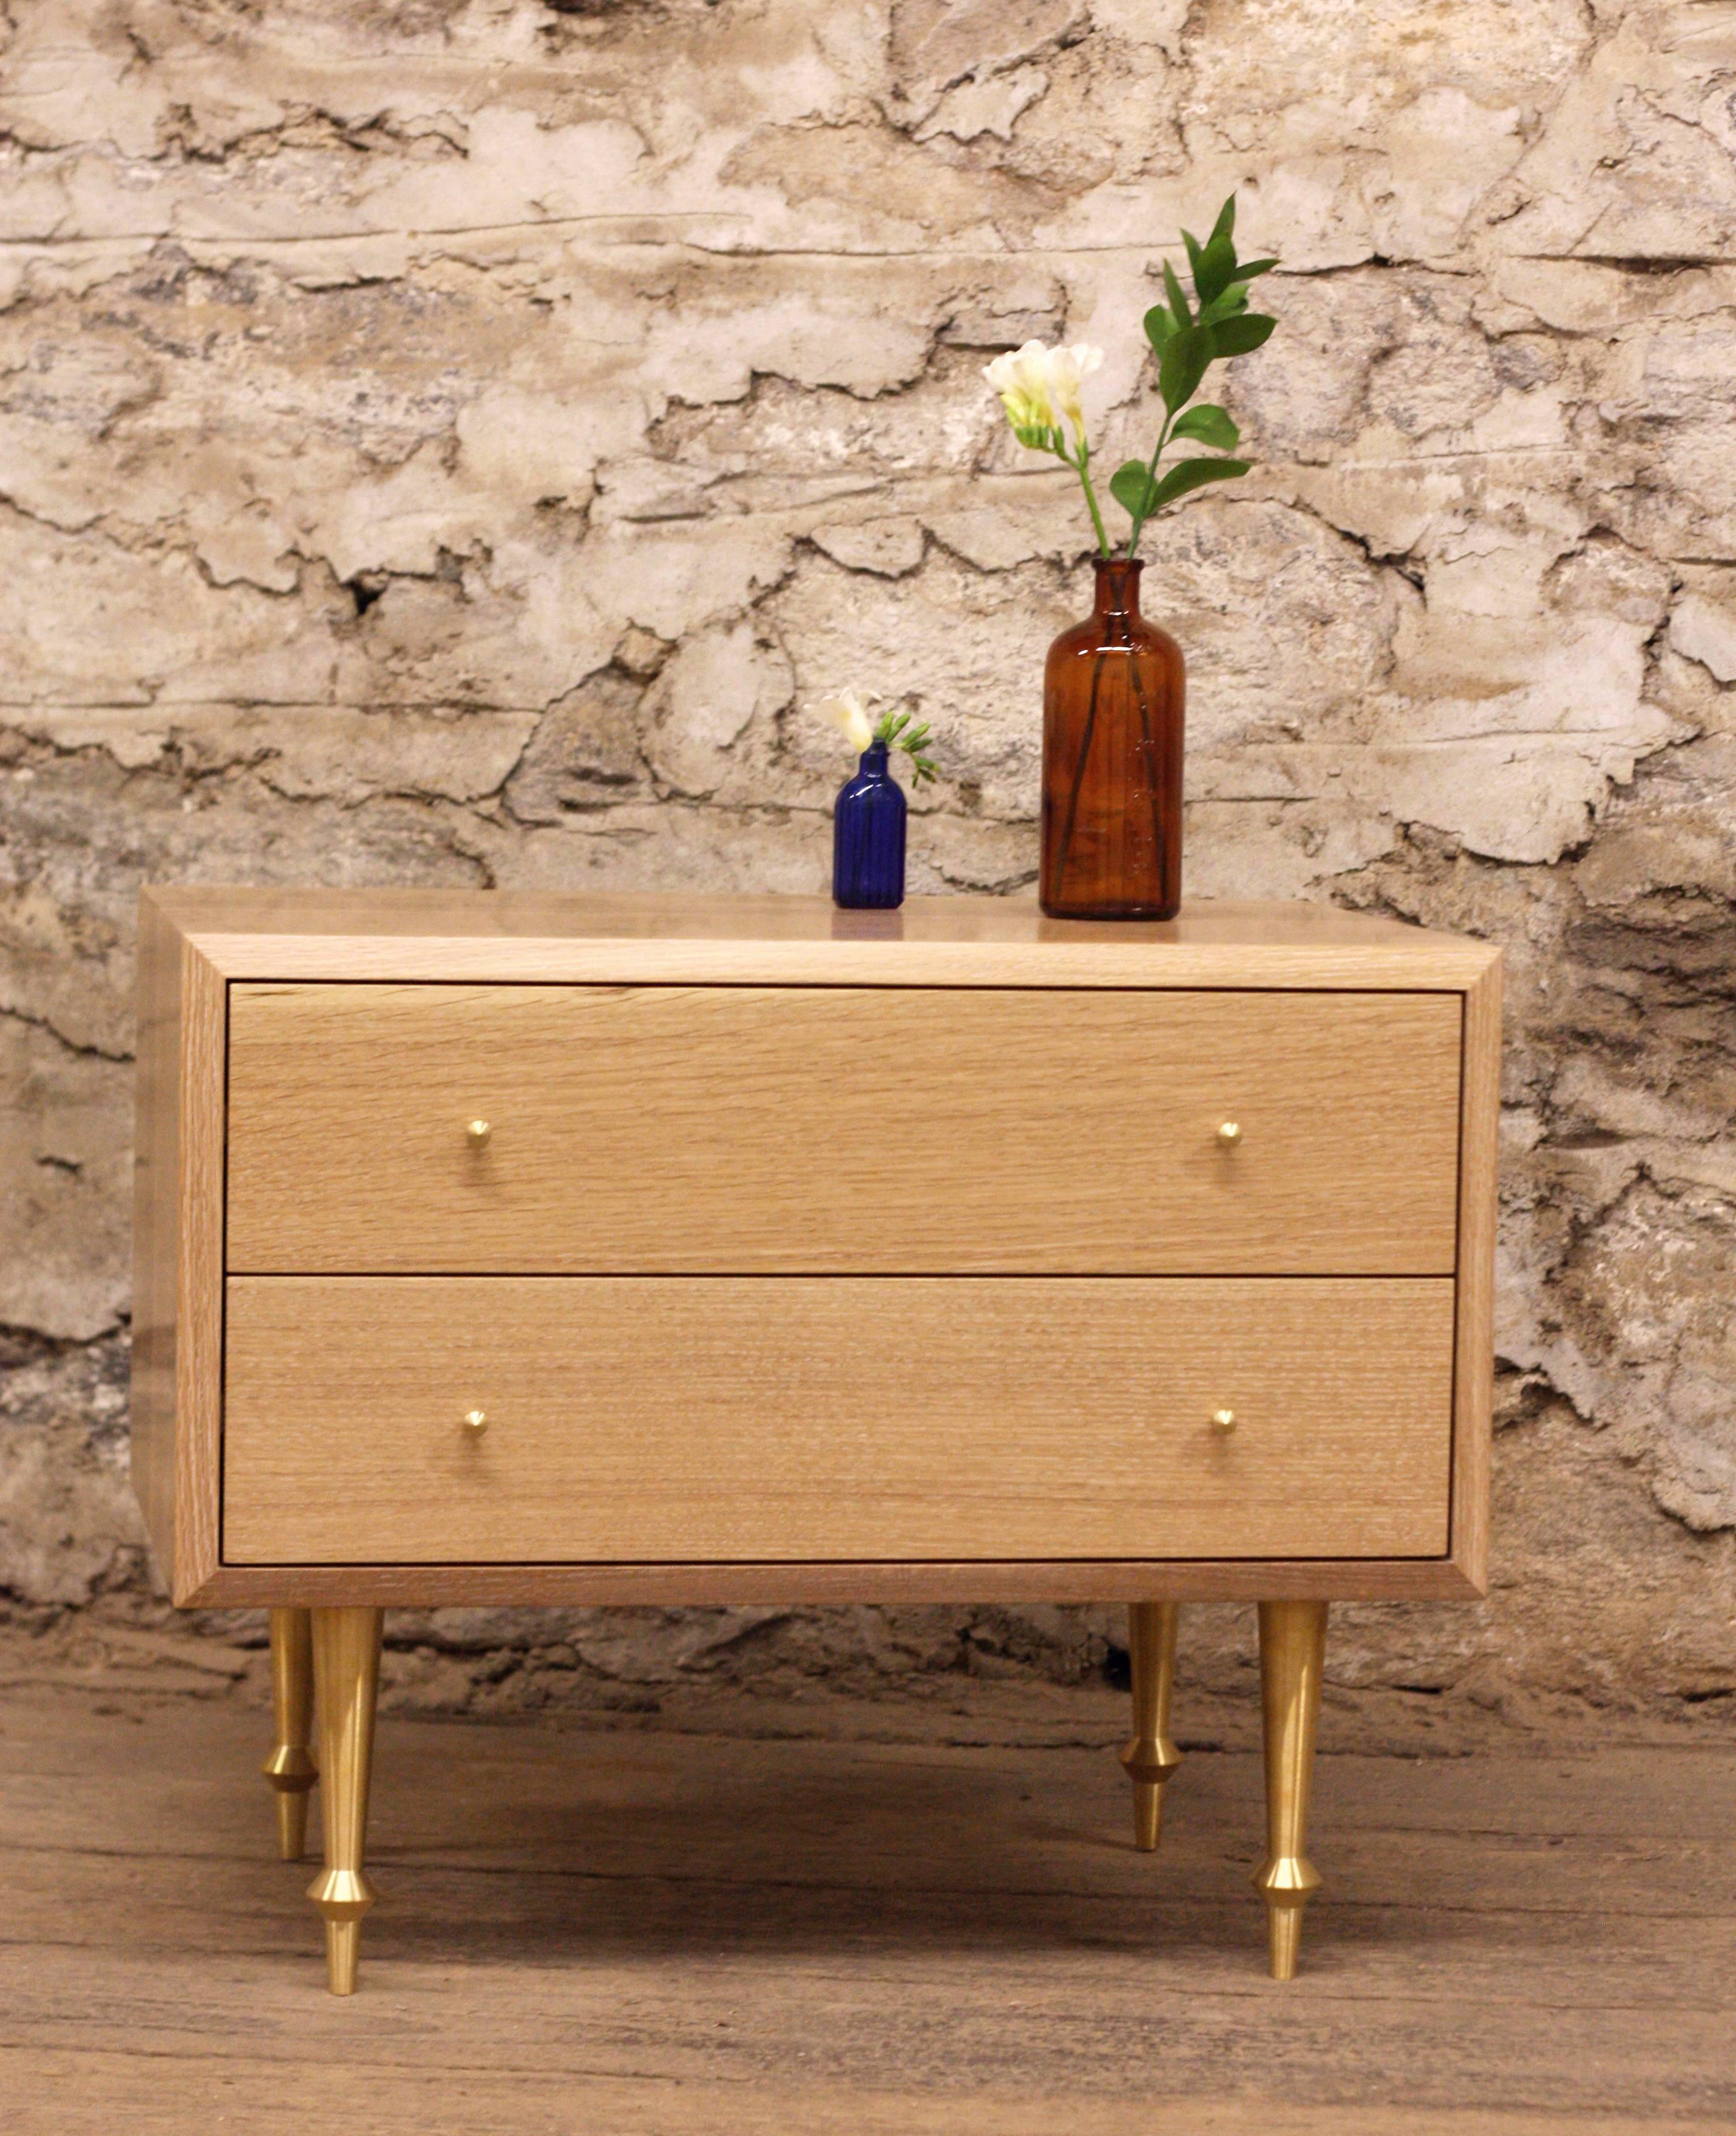 As shown:
Solid white oak with cerused finish.
Custom brass legs and turned brass drawer pulls.
Fabric lined drawers upon request at an additional fee.
Oil and wax finish.
Dimensions: 21” H x 26” W x 18” D.
Custom sizing available.
Offered in